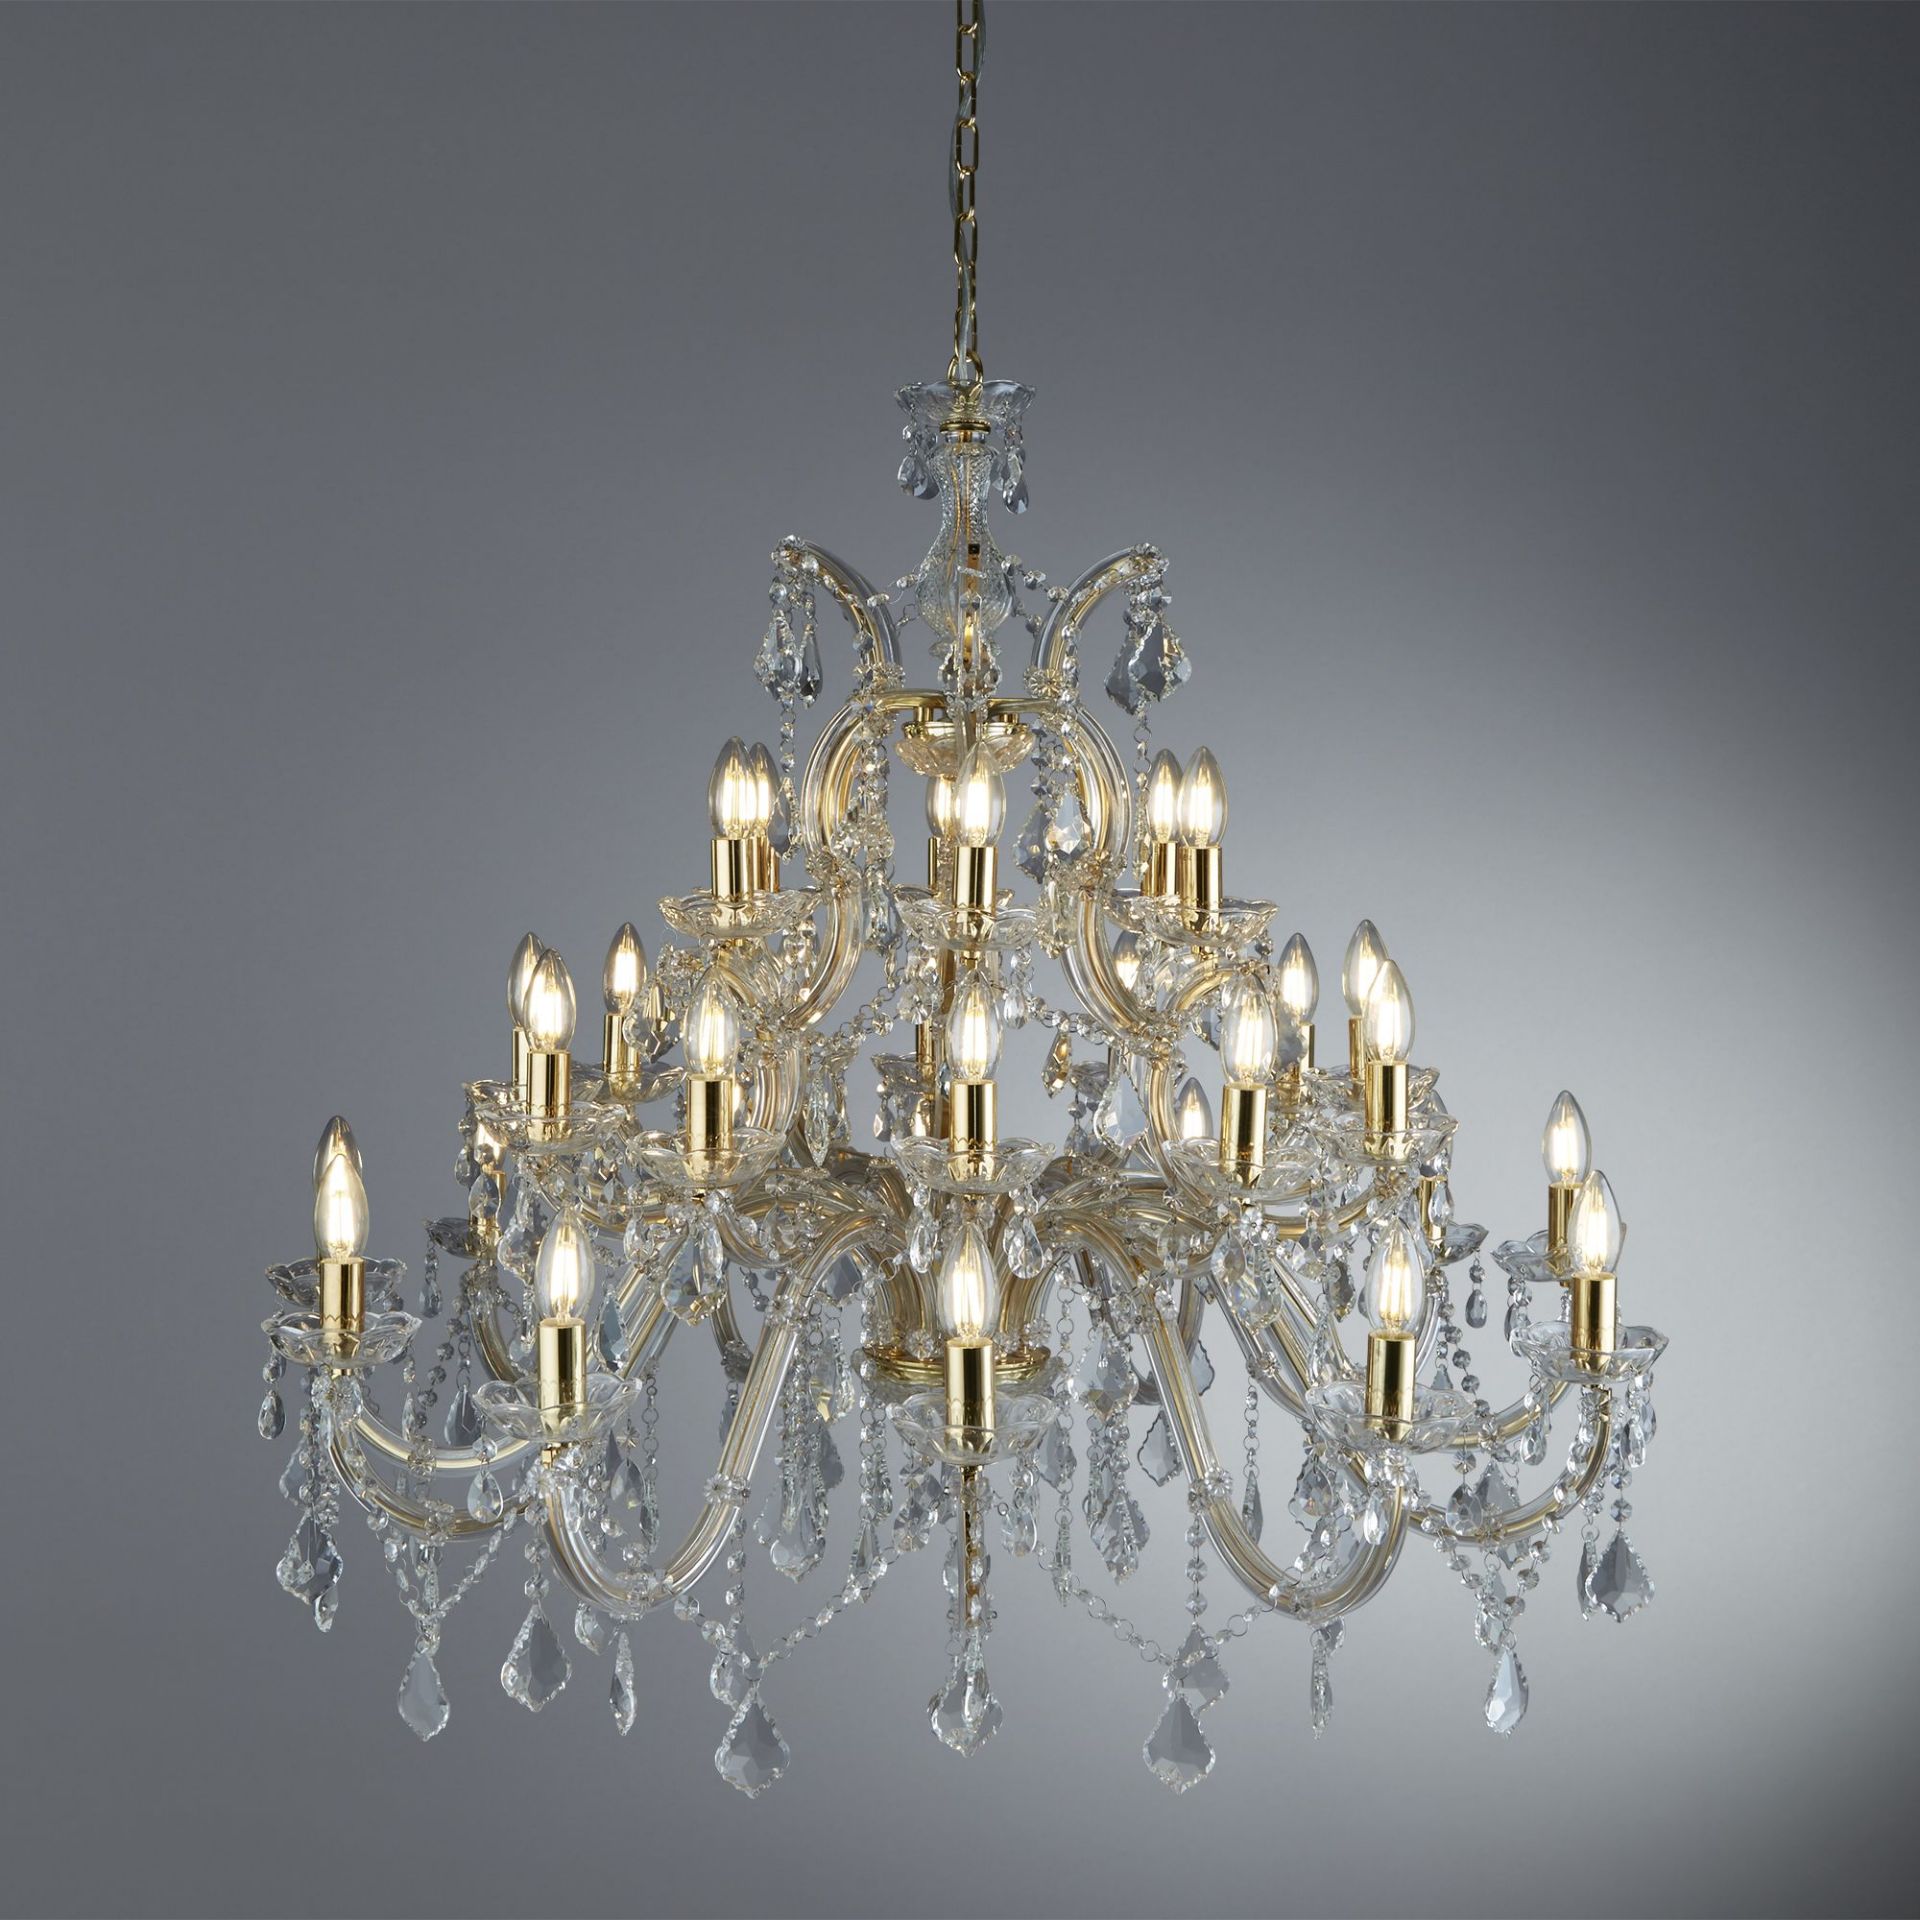 Crystal Chandelier 30 Light The Crystal lighting collection is inspired by the elaborate designs